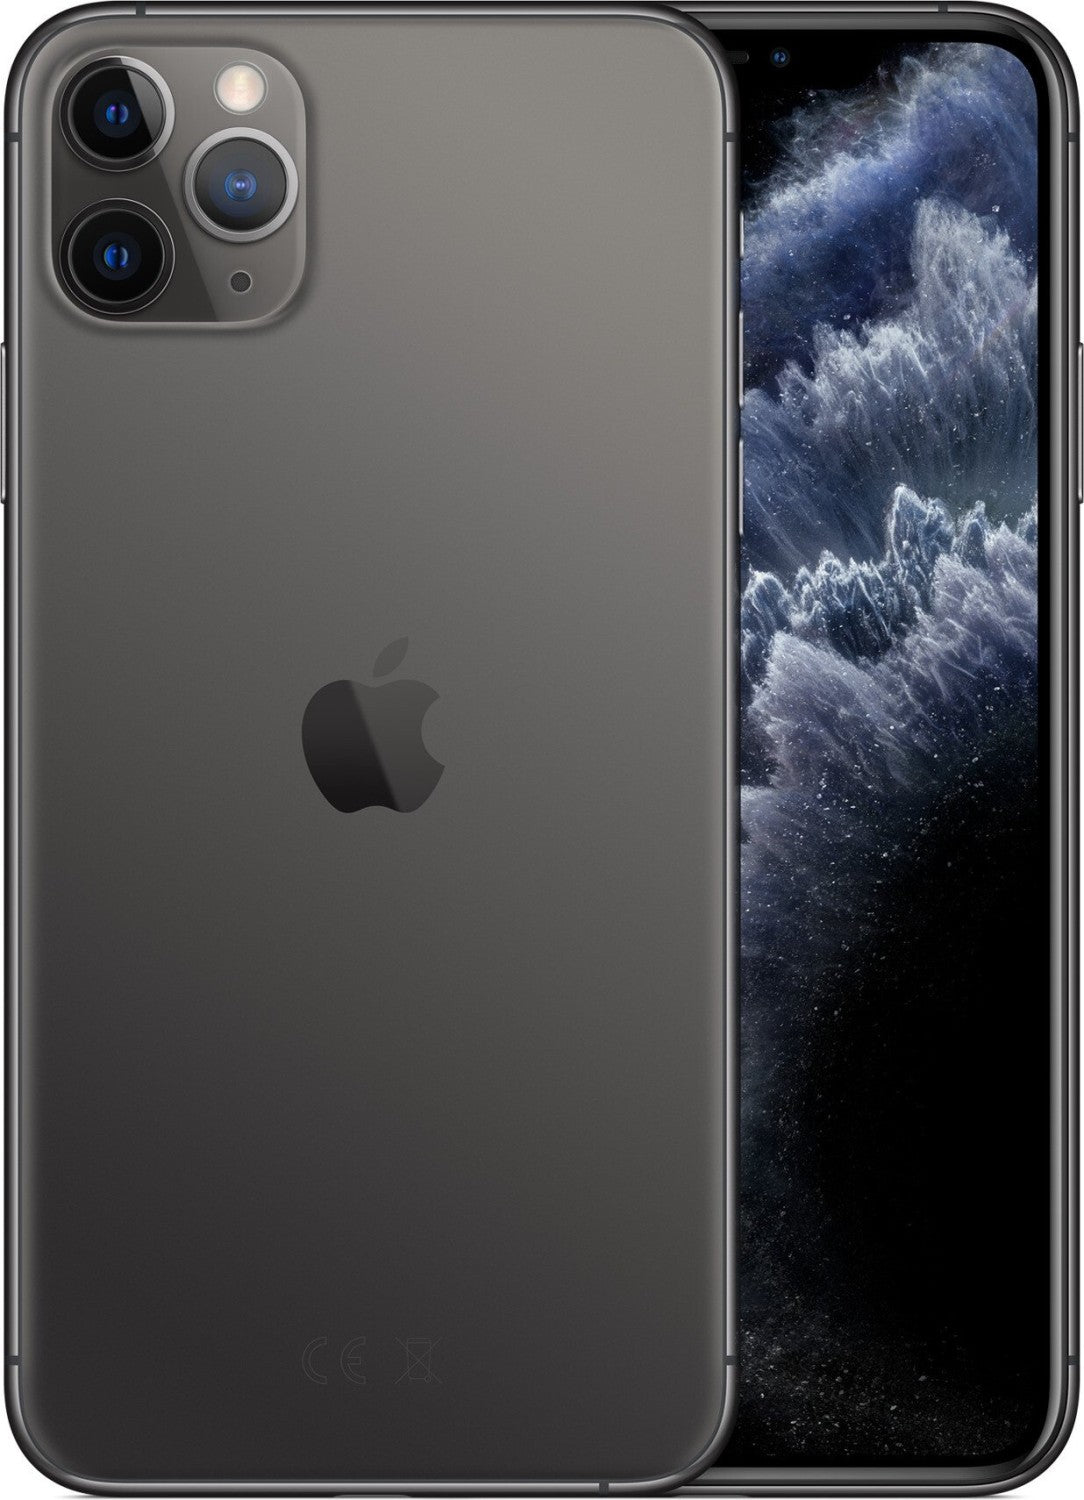 Apple iPhone 11 Pro Max | 64GB | Space Gray | GBR.